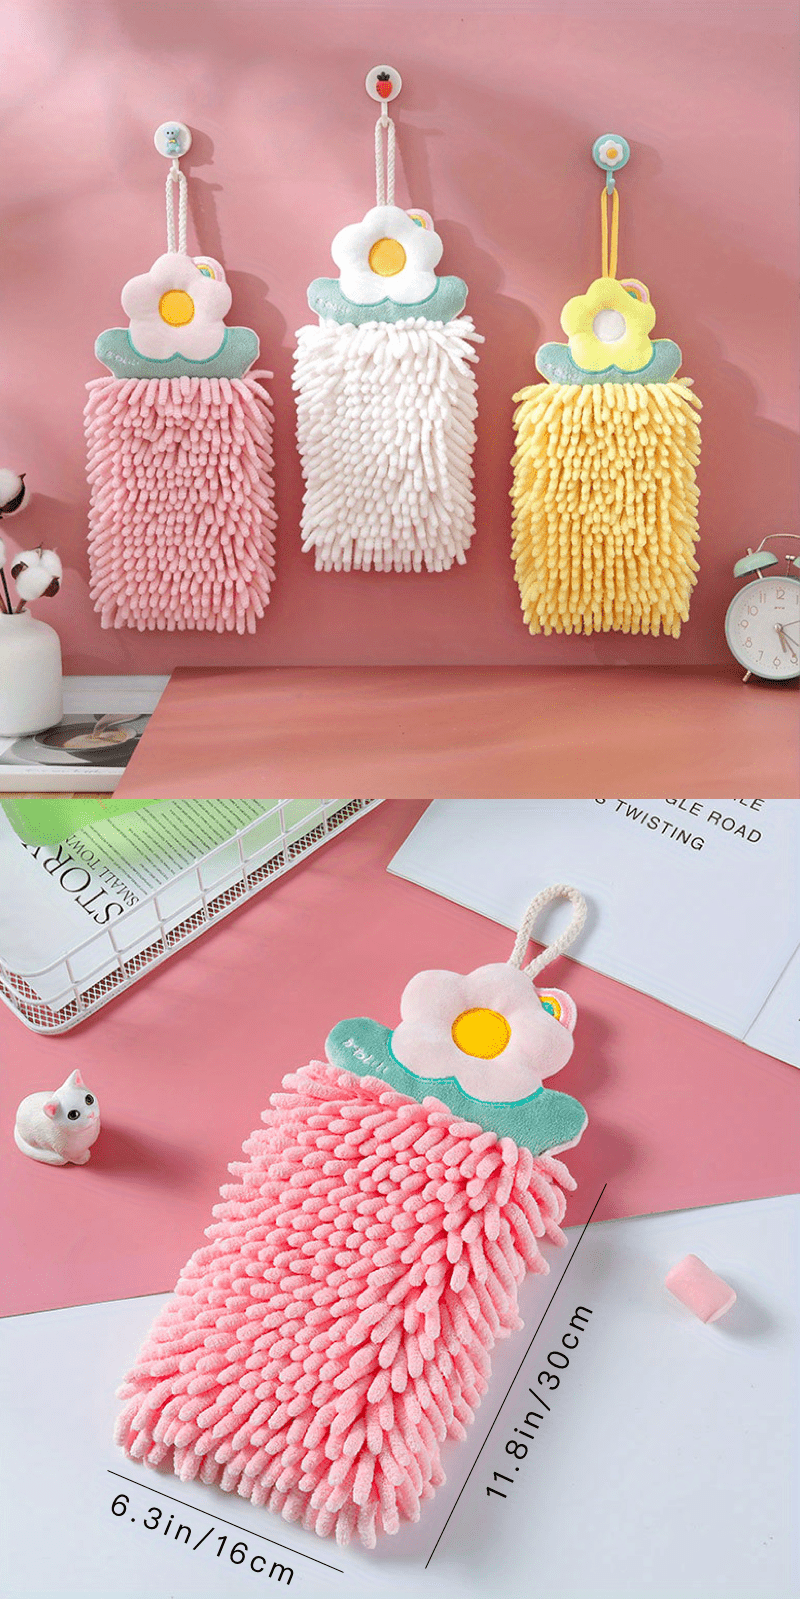 Chenille Flower Hand Towel, Can Be Hung Double Thickened Absorbent